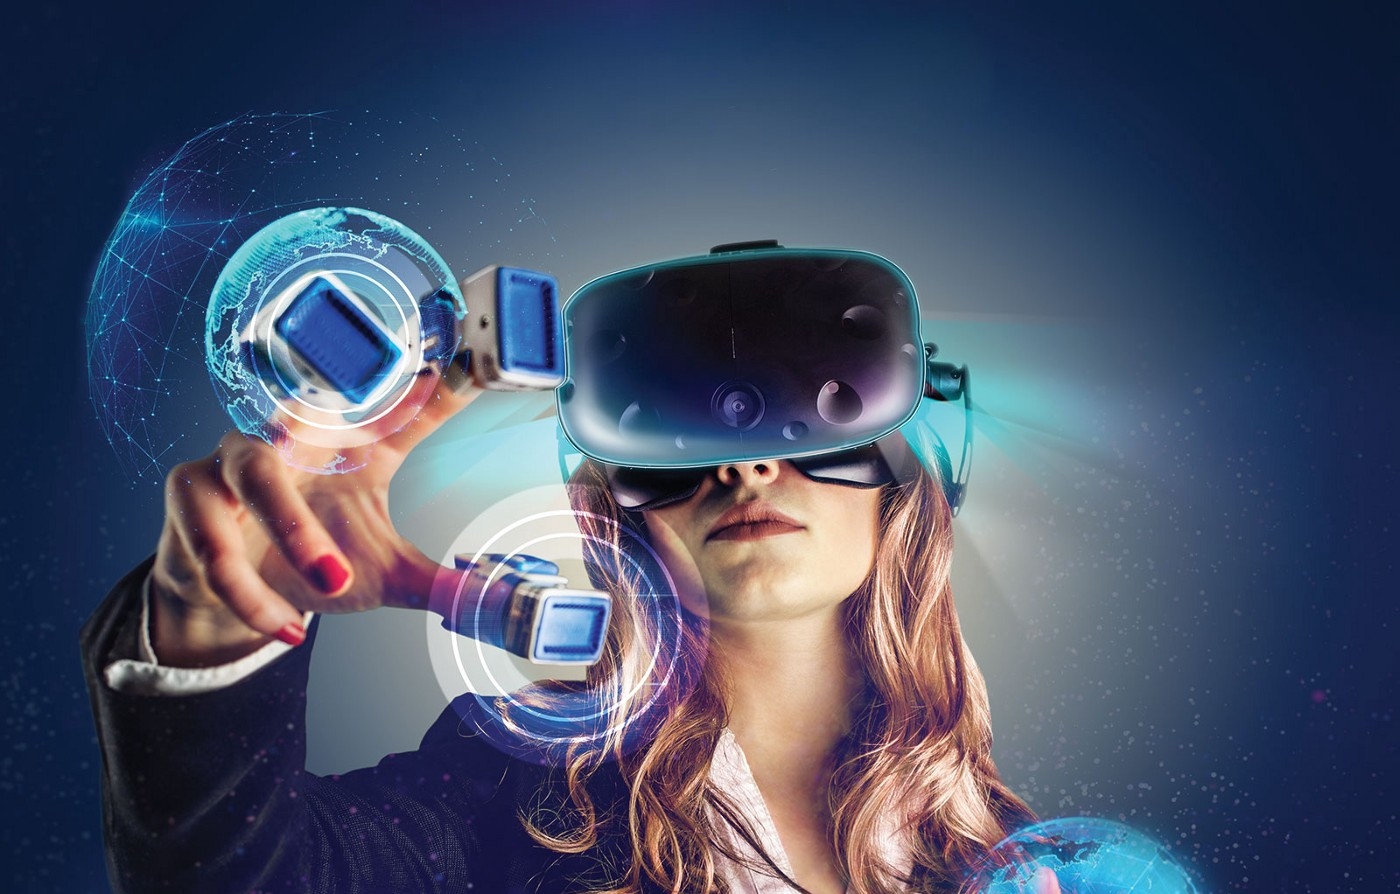 Will Virtual Reality Finally Take Off? 3 Issues That Are Hindering VR